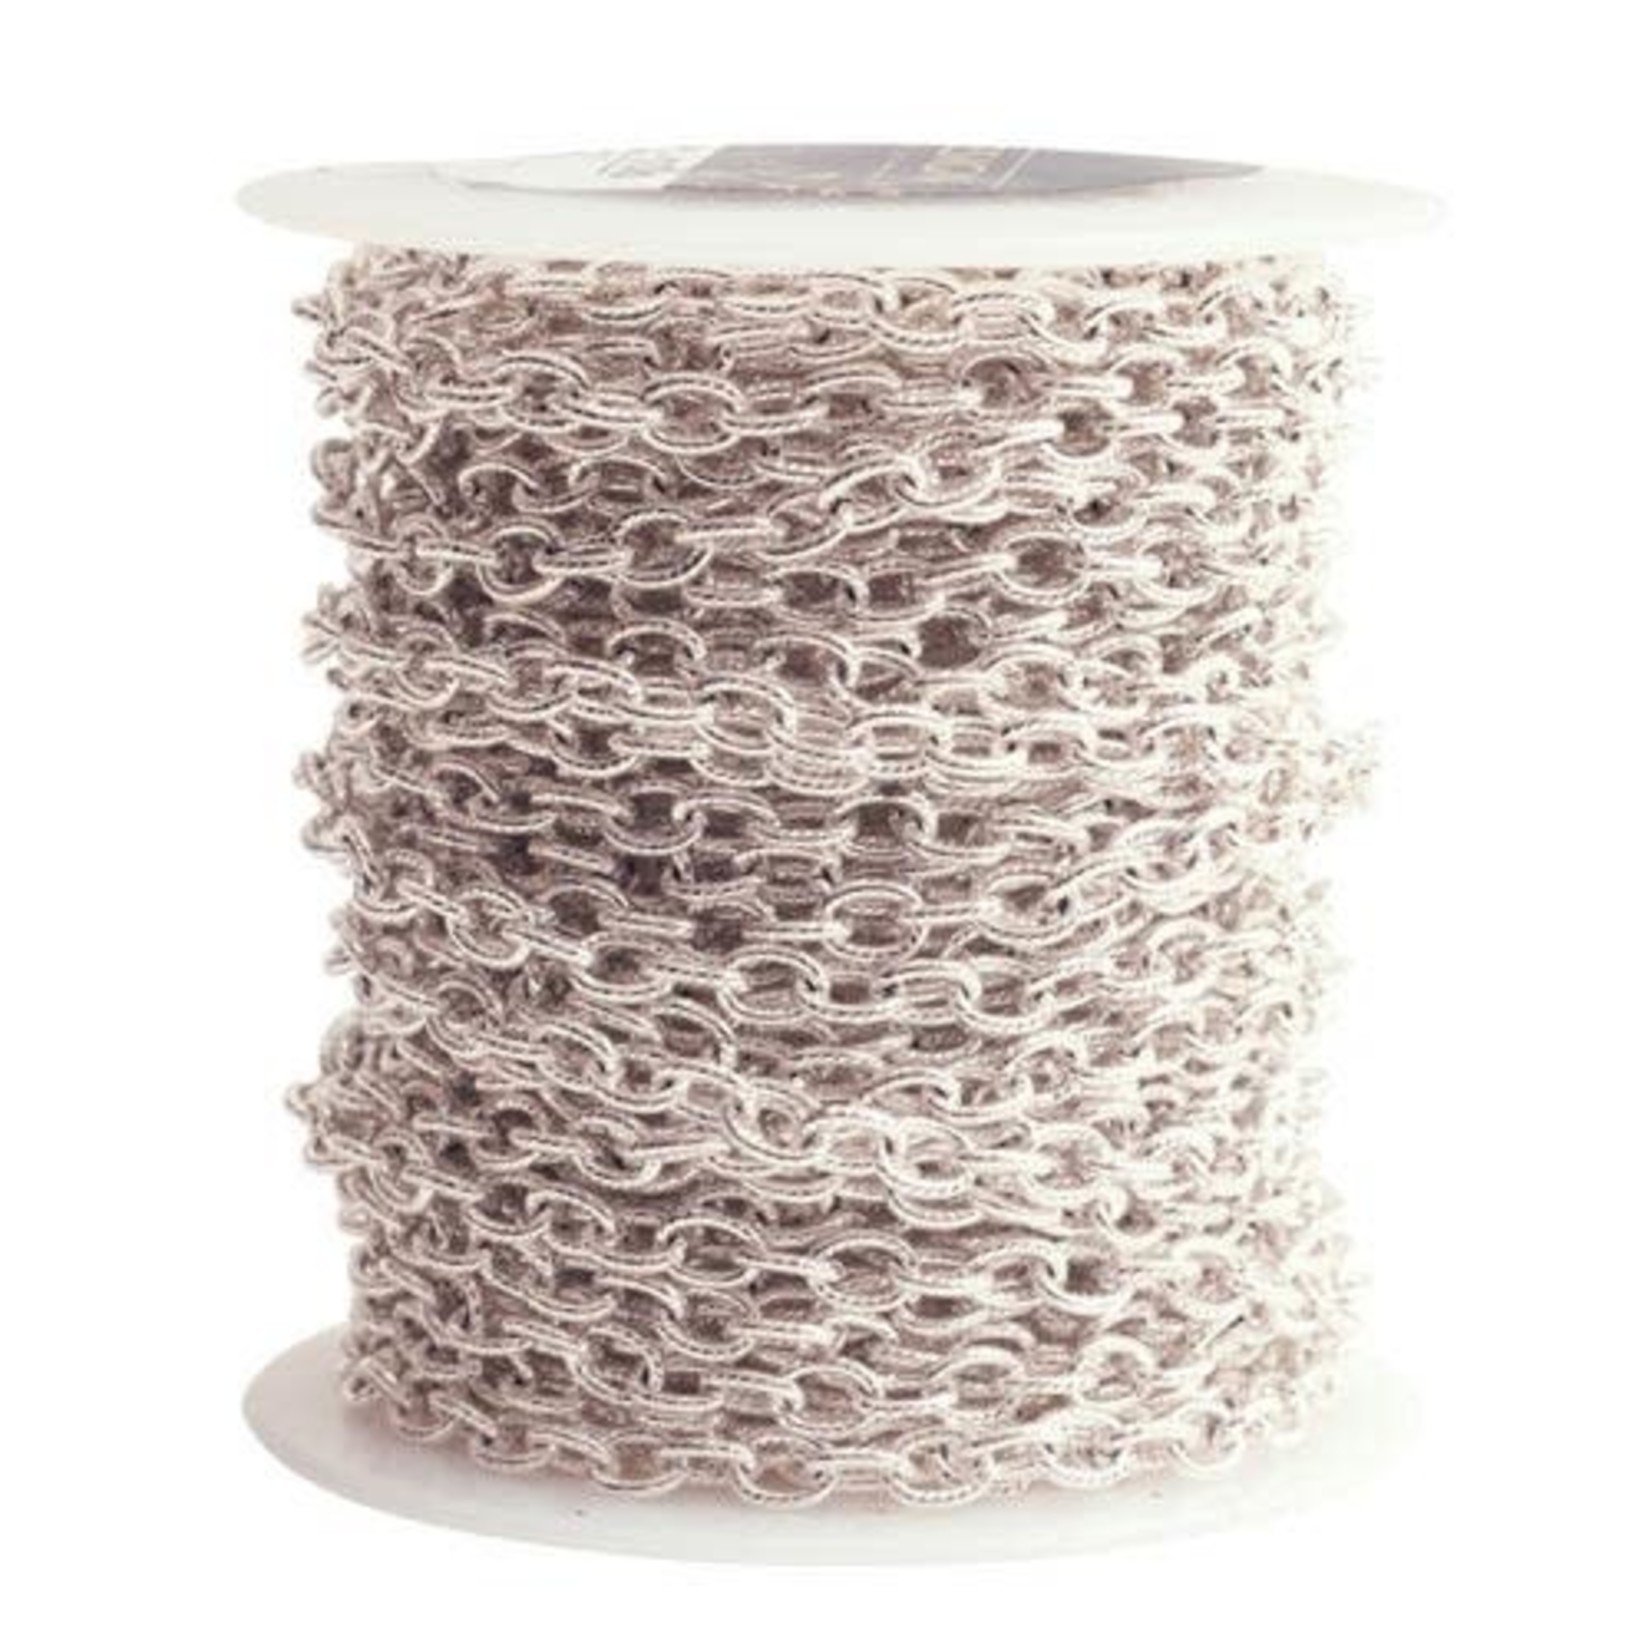 Nunn Design Small Textured Cable Chain - Bright Silver Plated